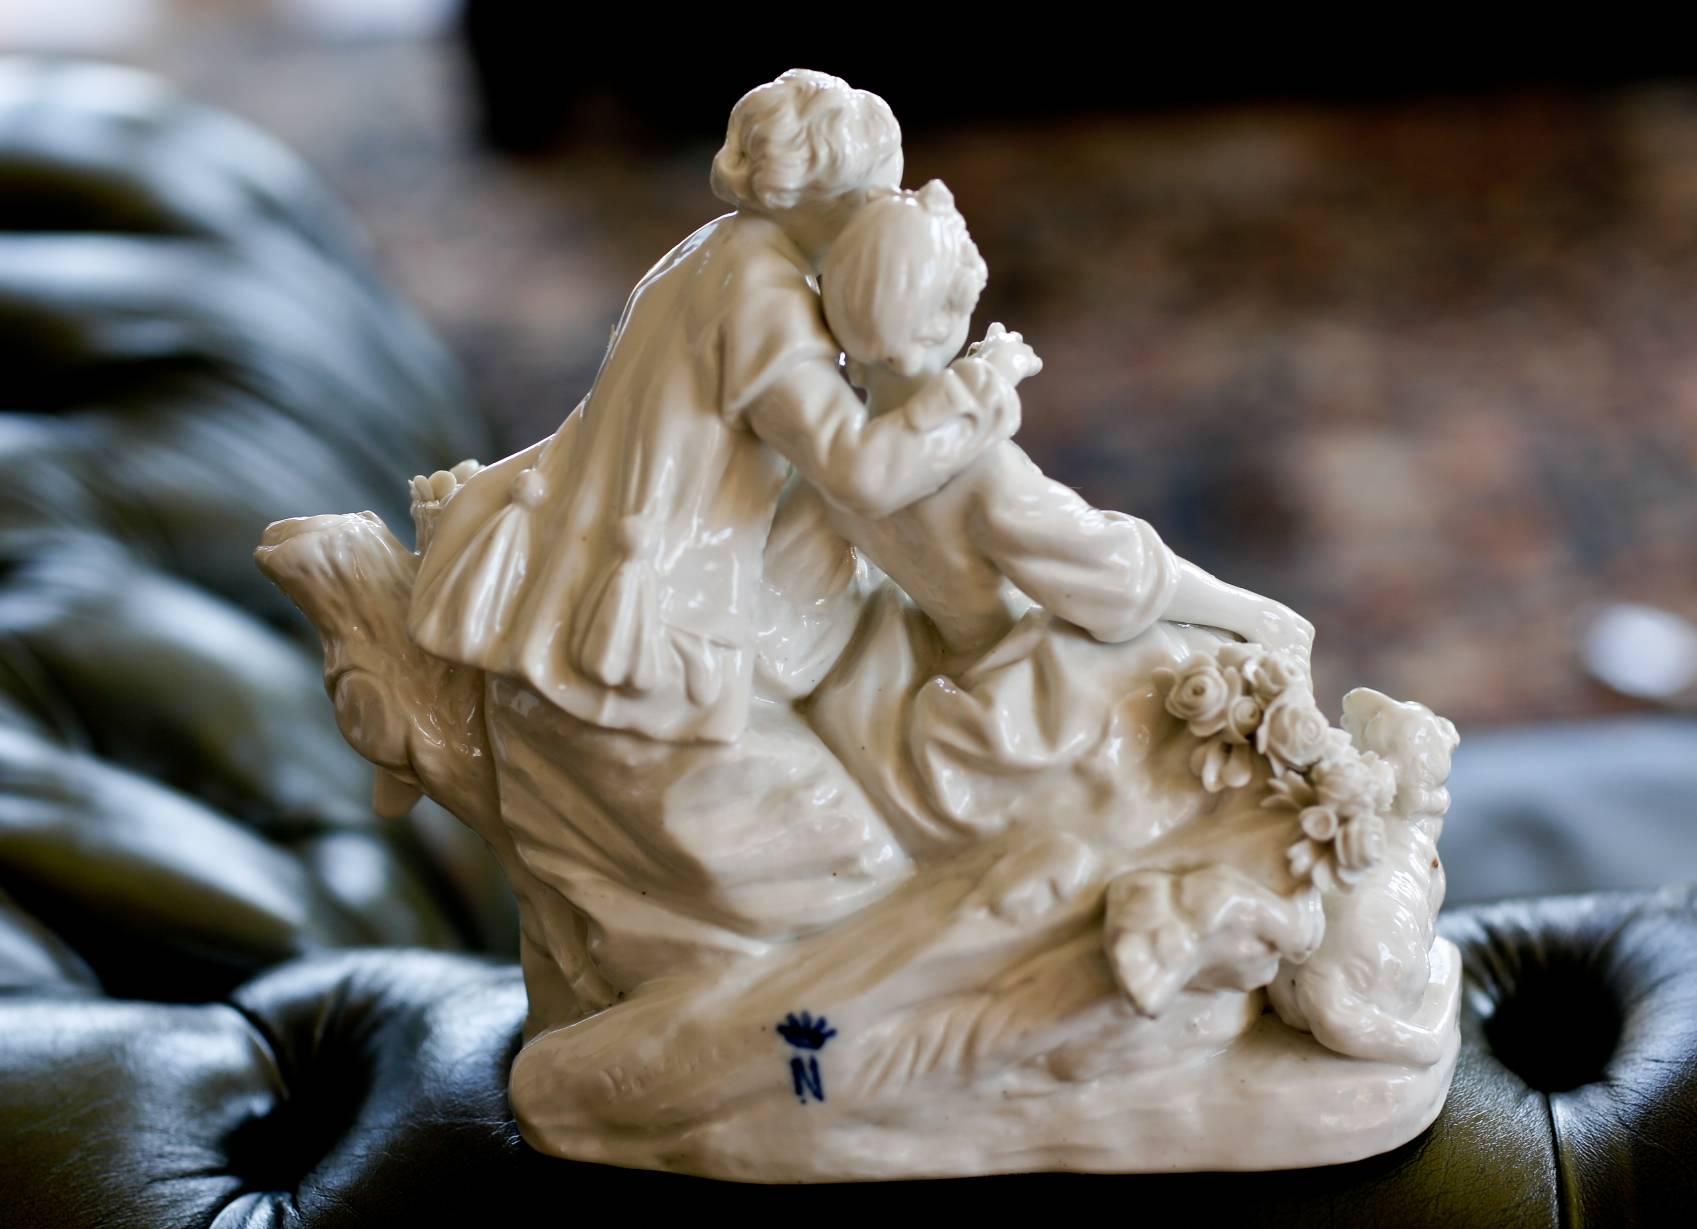 Biscuit porcelain 'Le Fluteur Boucher'
circa 1751-1755, 
Modeled after Boucher, representing a maiden seated on rockwork, in a talk with a gallant, supporting a basket of flowers, a lamb and dog at their feet.
 